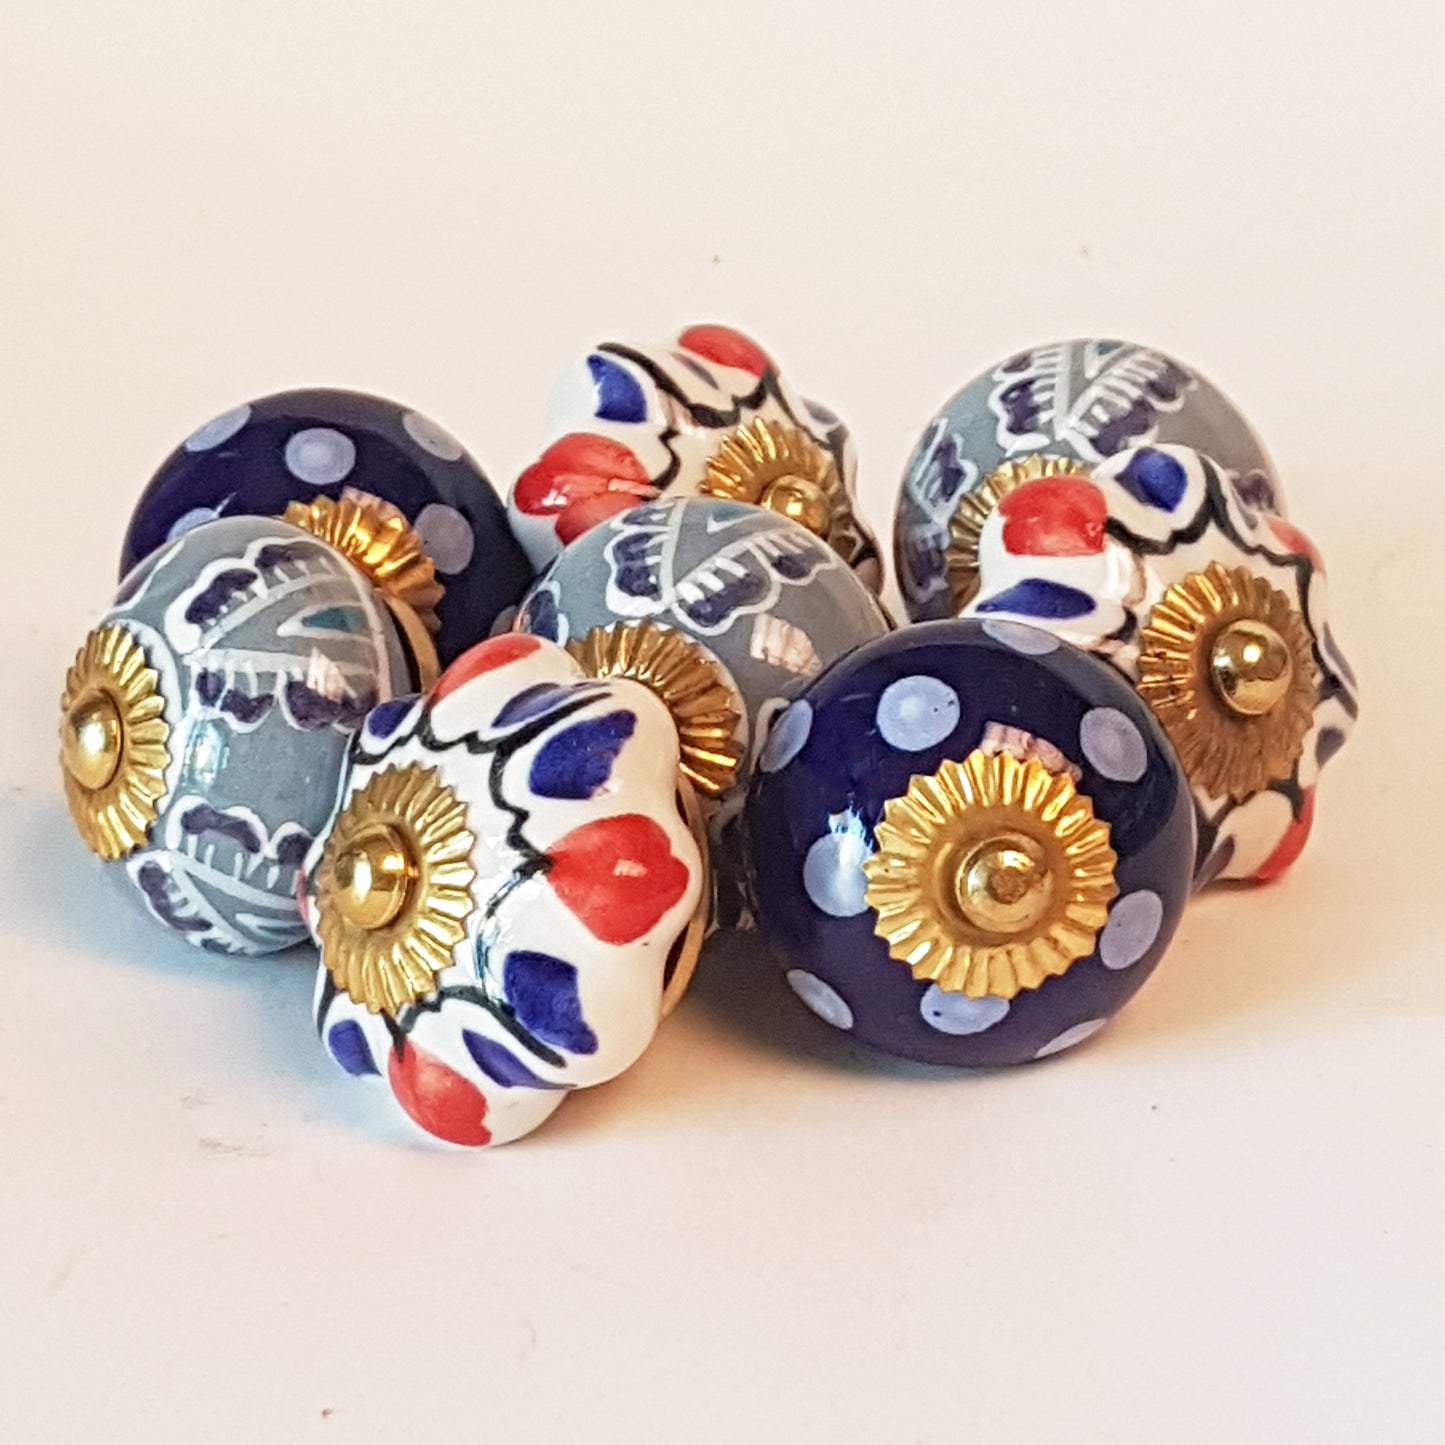 Lavender Fields set of 8 cabinet knobs-dresser drawer pulls in colorful hand painted, exclusive designs. 1.5 inch diameter.